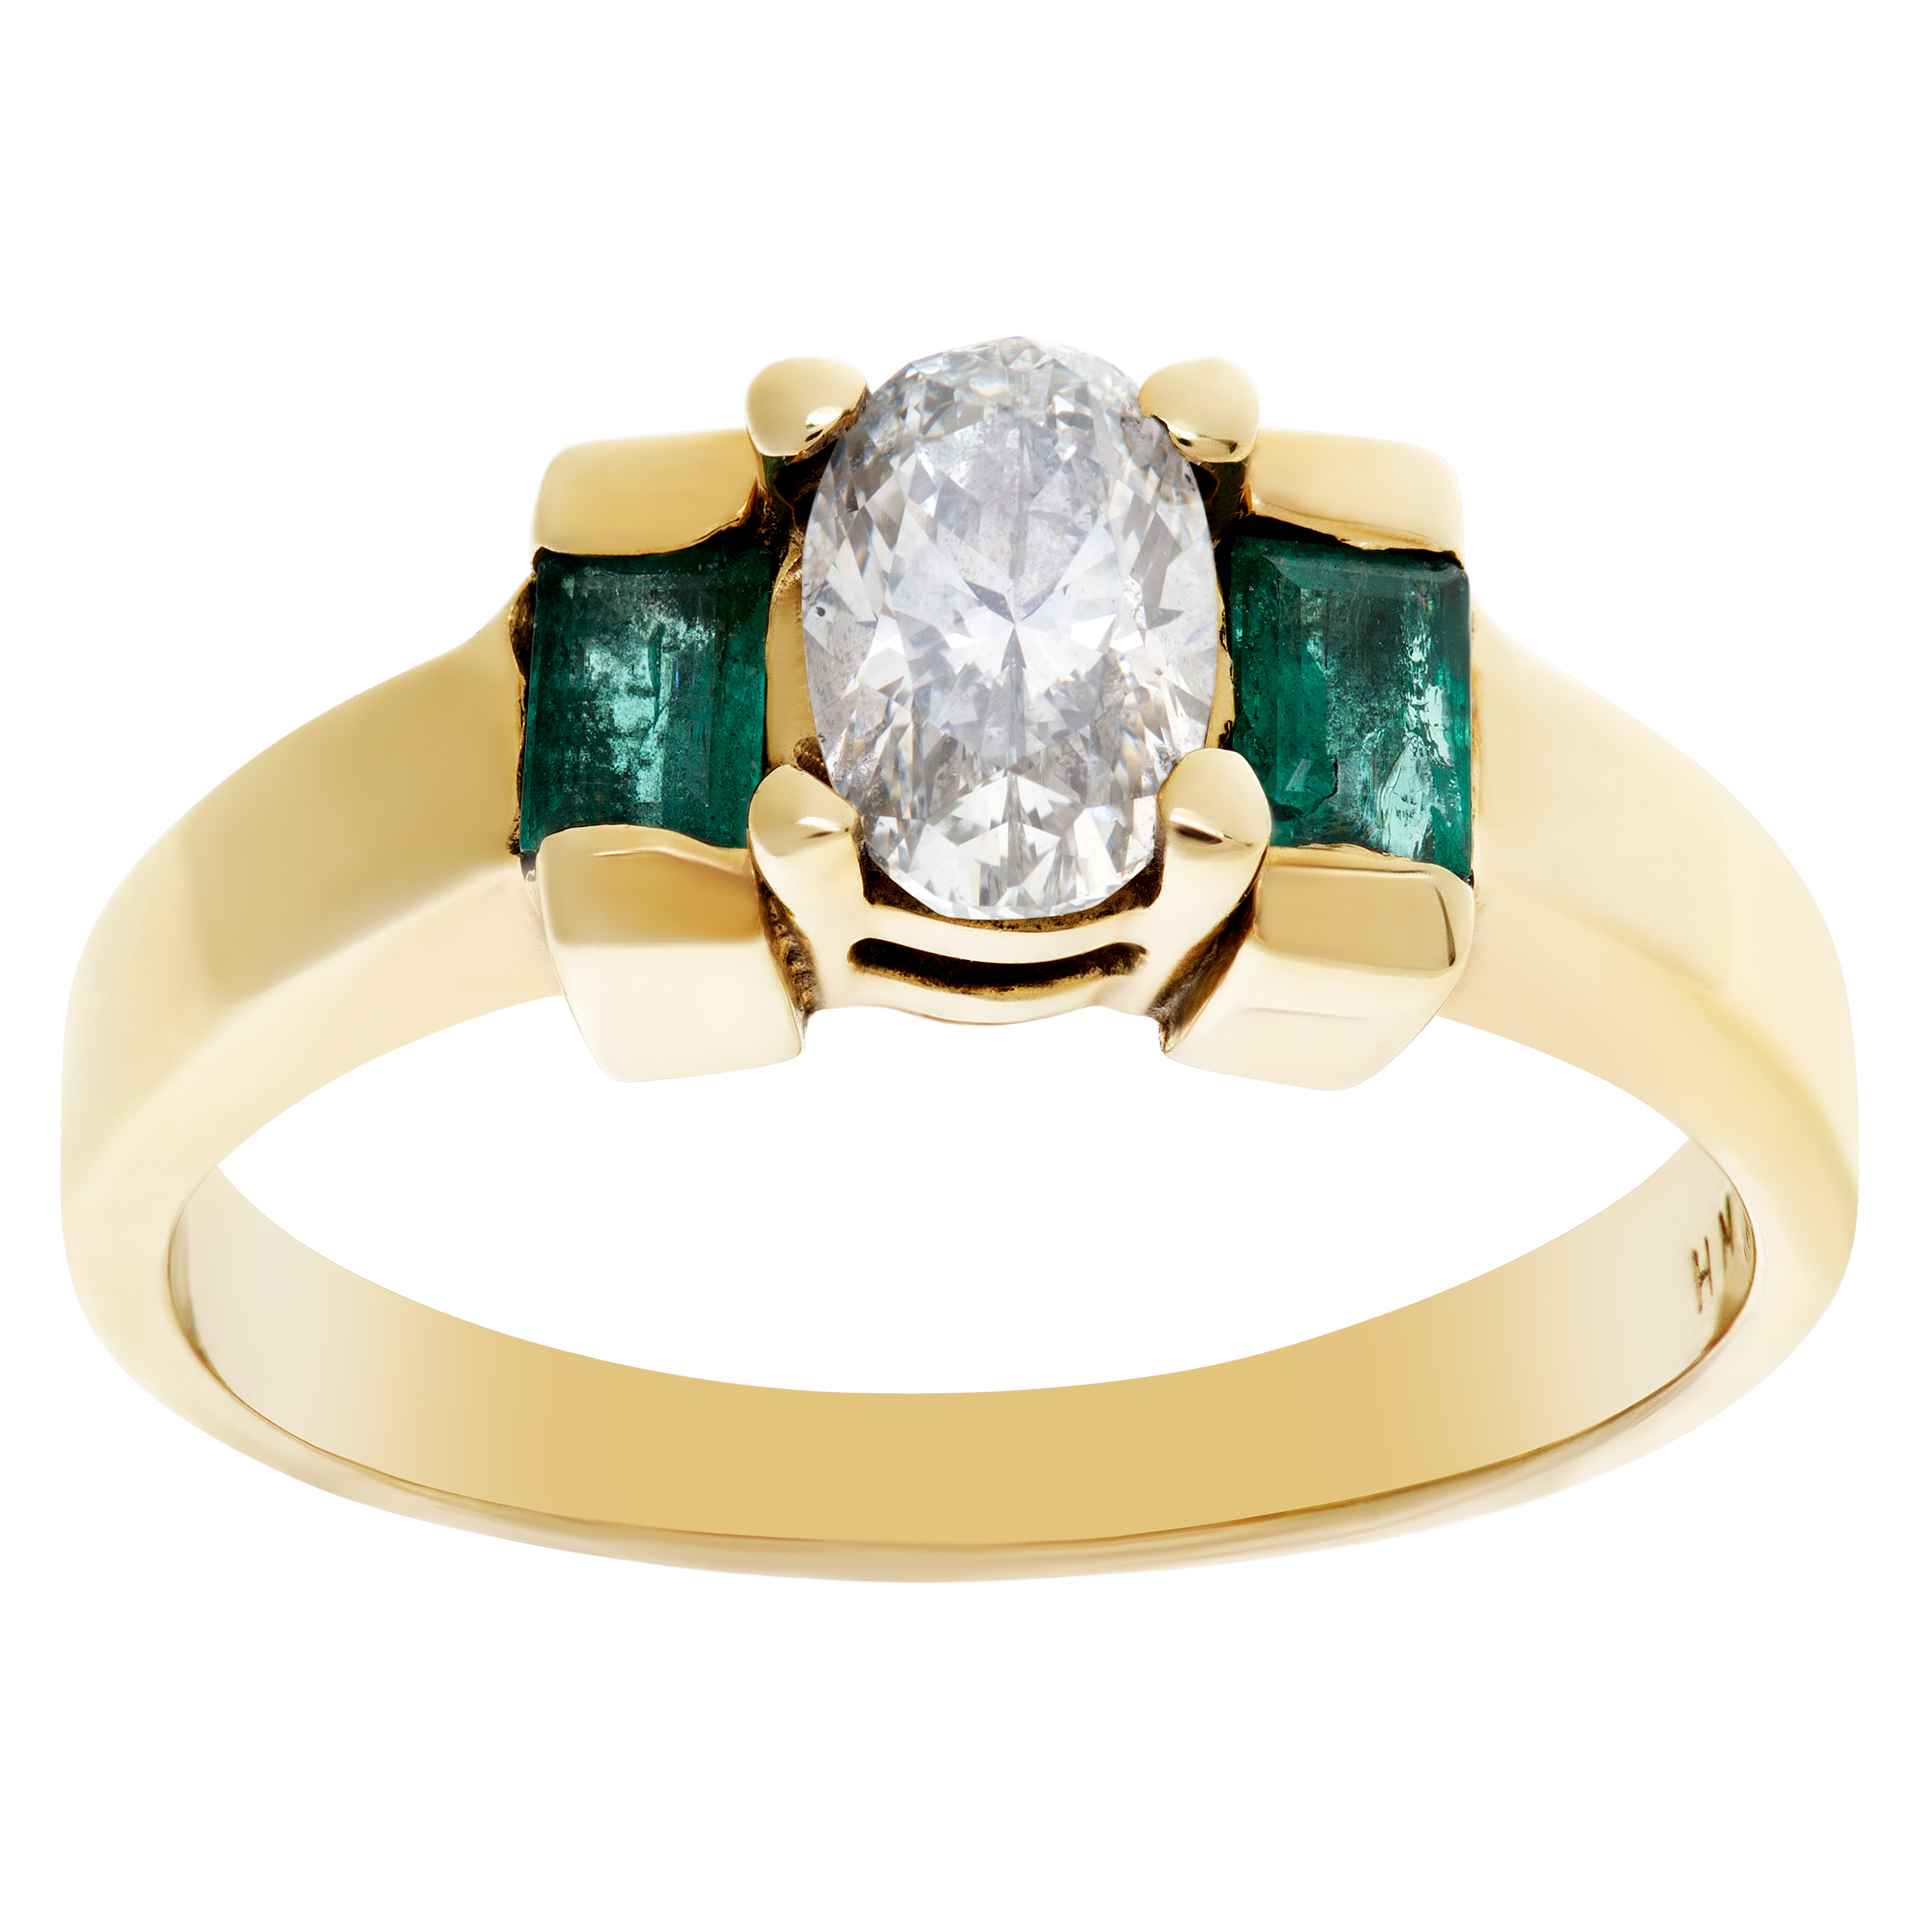 Adorable diamond and emerald ring in 14k. 0.50cts oval diamond (H-I, VS2) image 1